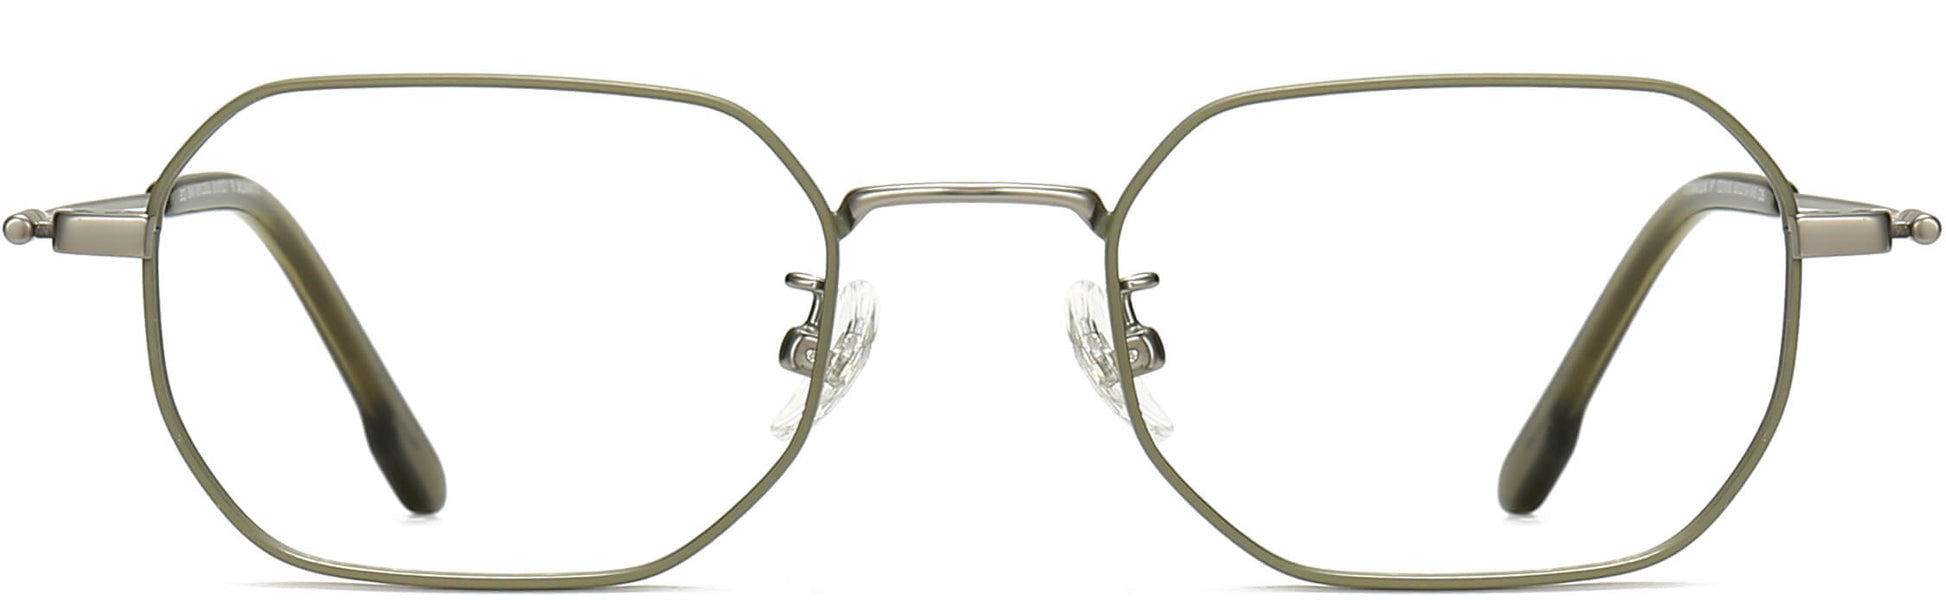 Cillian Geometric Green Eyeglasses from ANRRI, front view